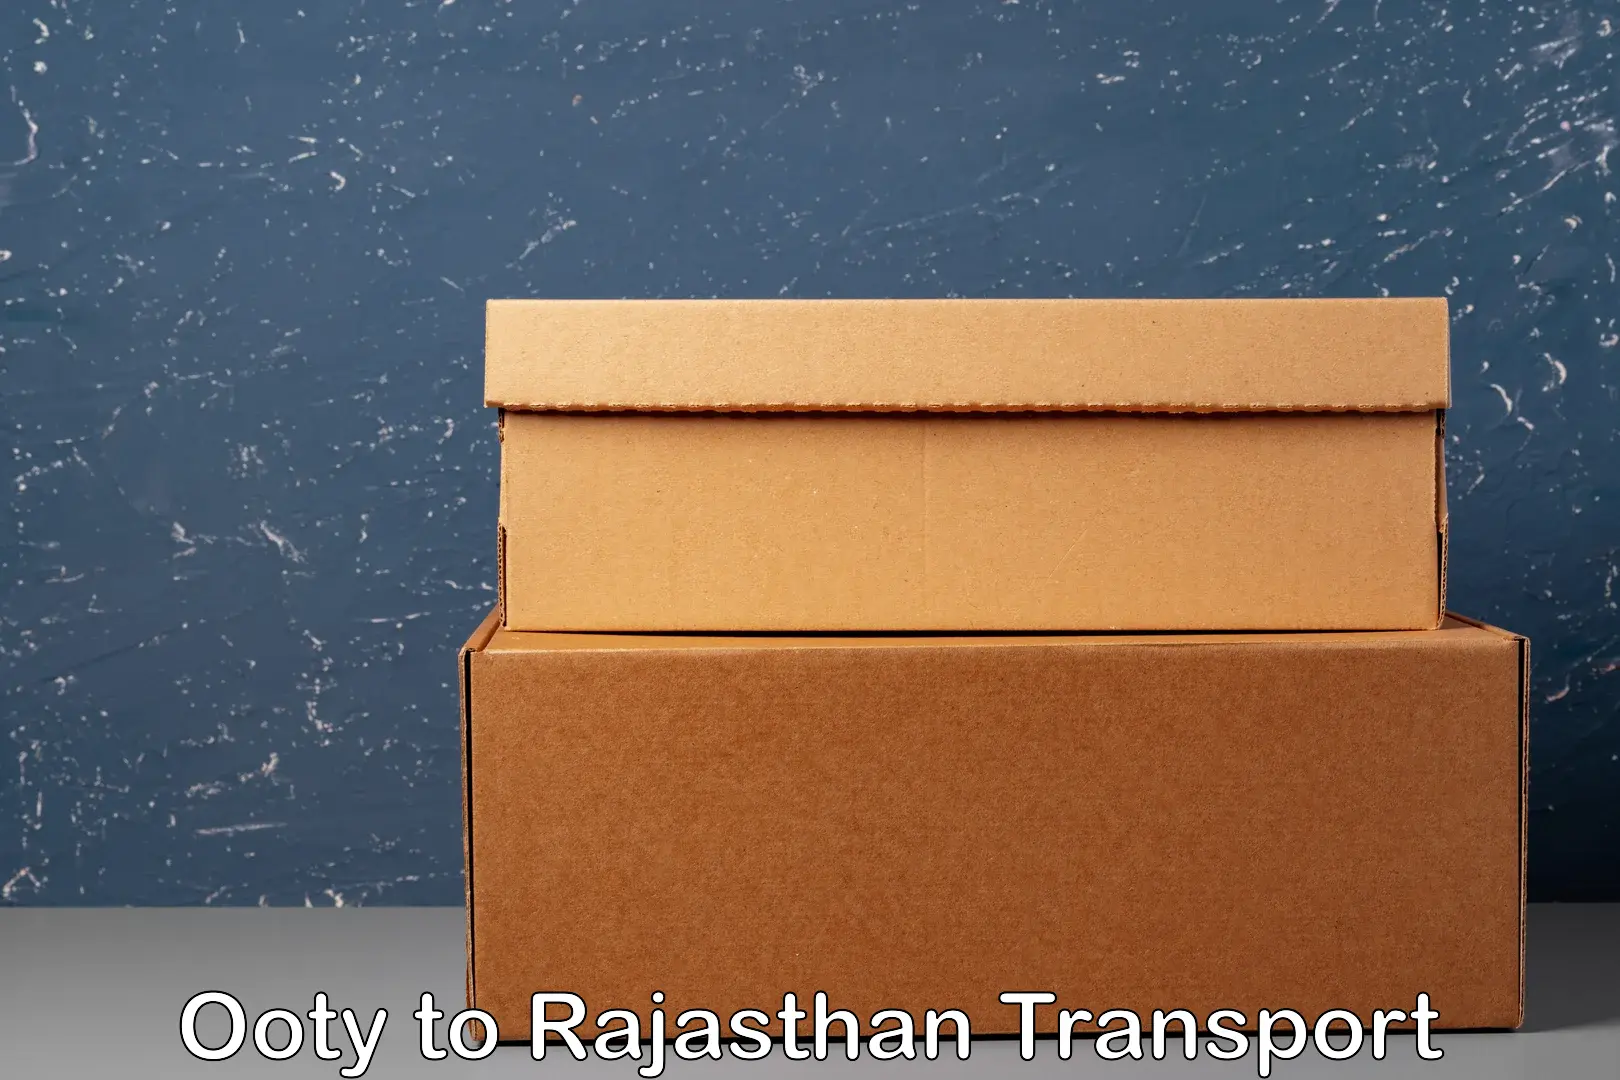 Furniture transport service Ooty to Nadoti